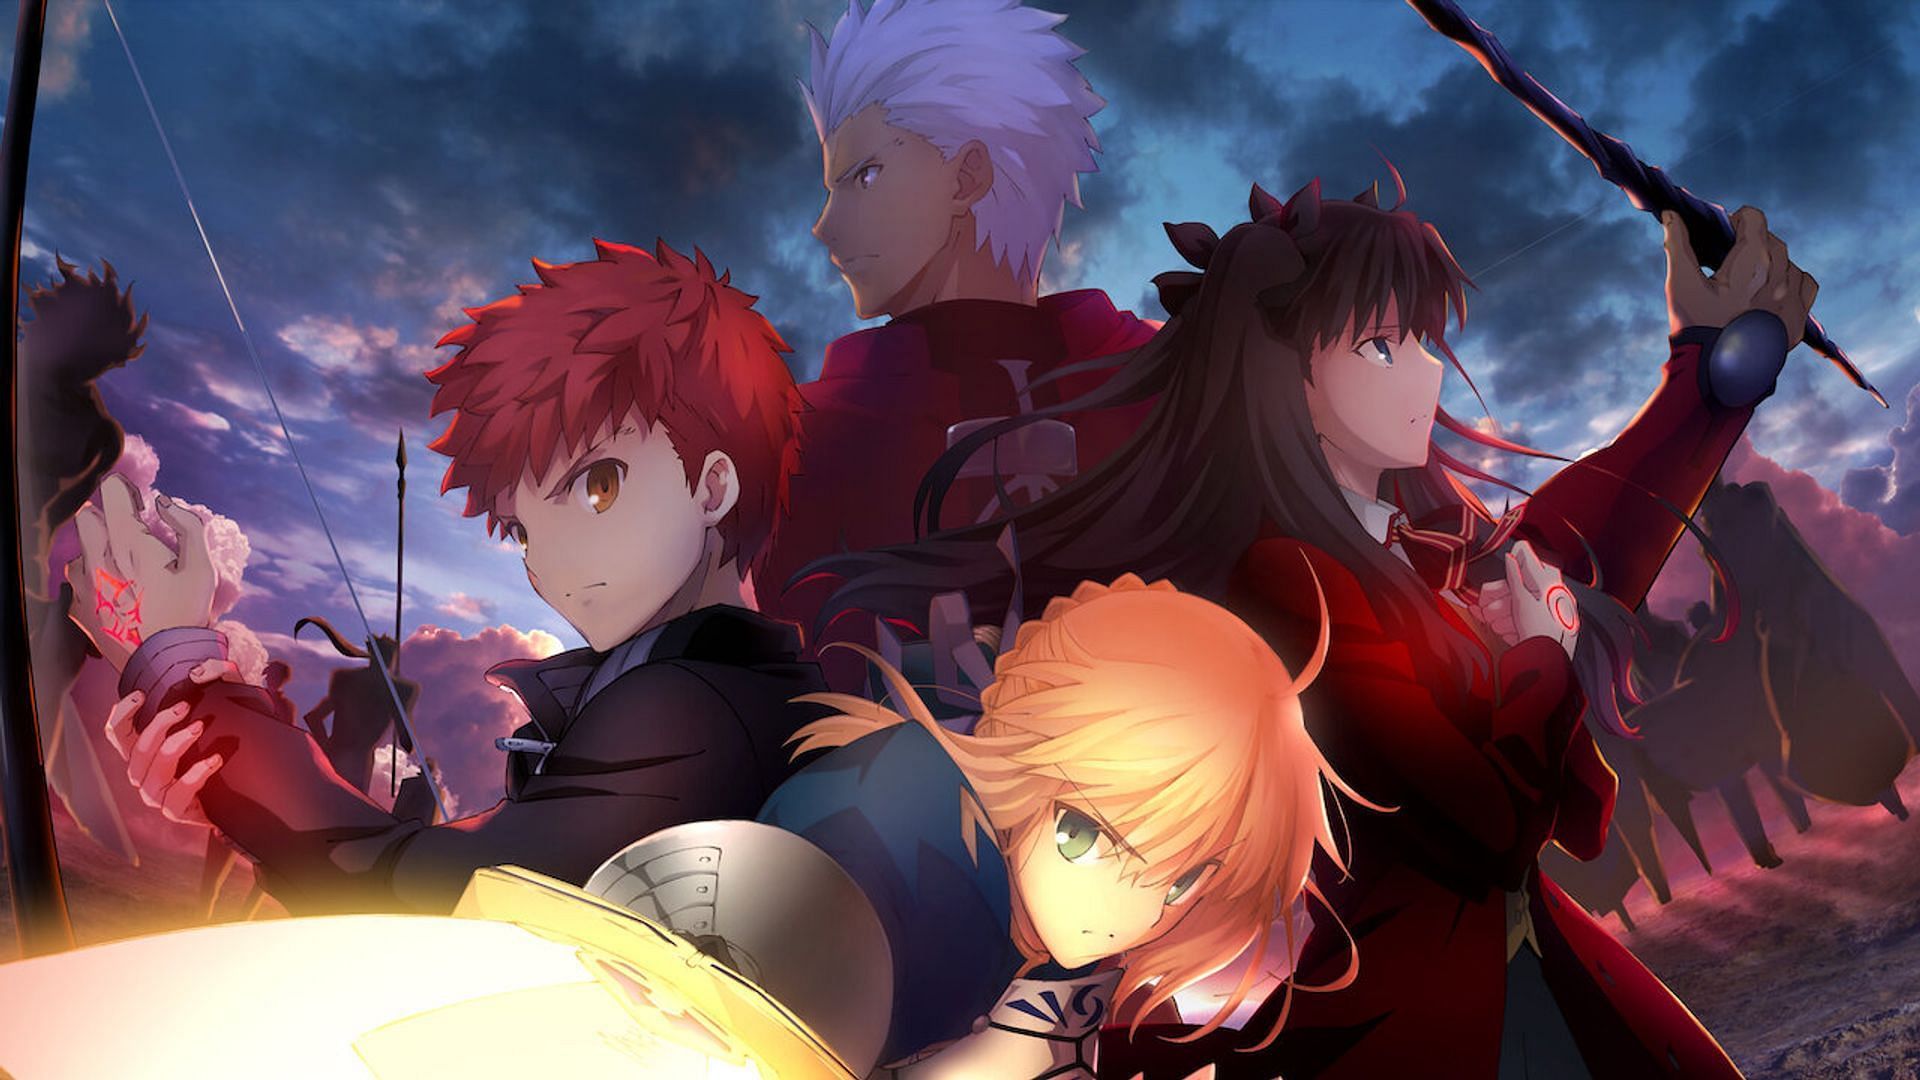 Pin by goodman 好男人 on Fate/Servant only  Fate anime series, Fate stay  night anime, Fate